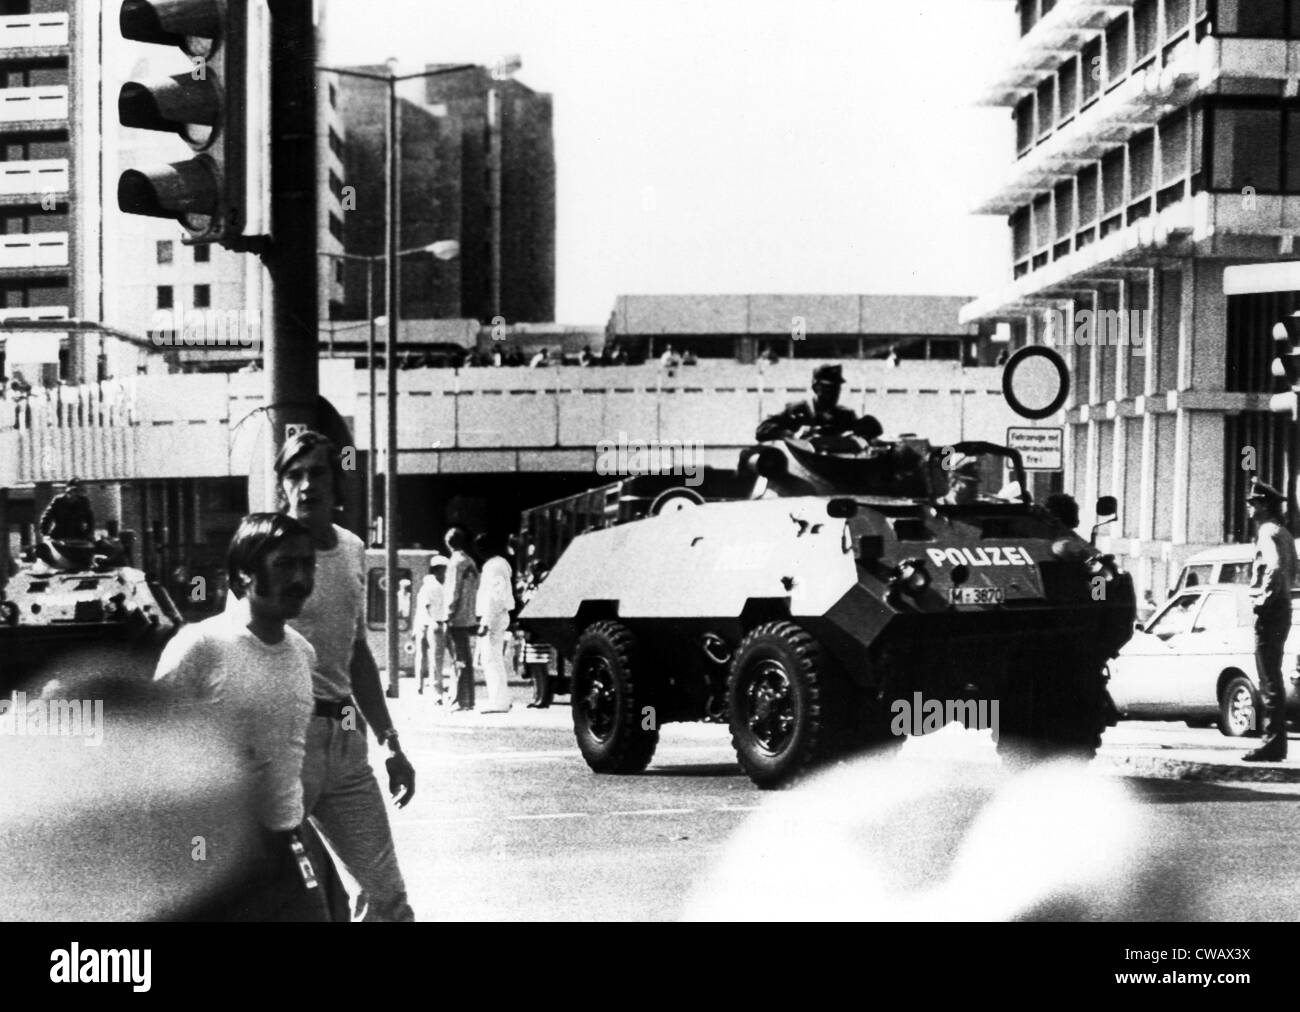 1972 Olympics, West German Police patrol Olympic Village in armored vehicles, Munich, Germany, 09-05-1972.. Courtesy: CSU Stock Photo